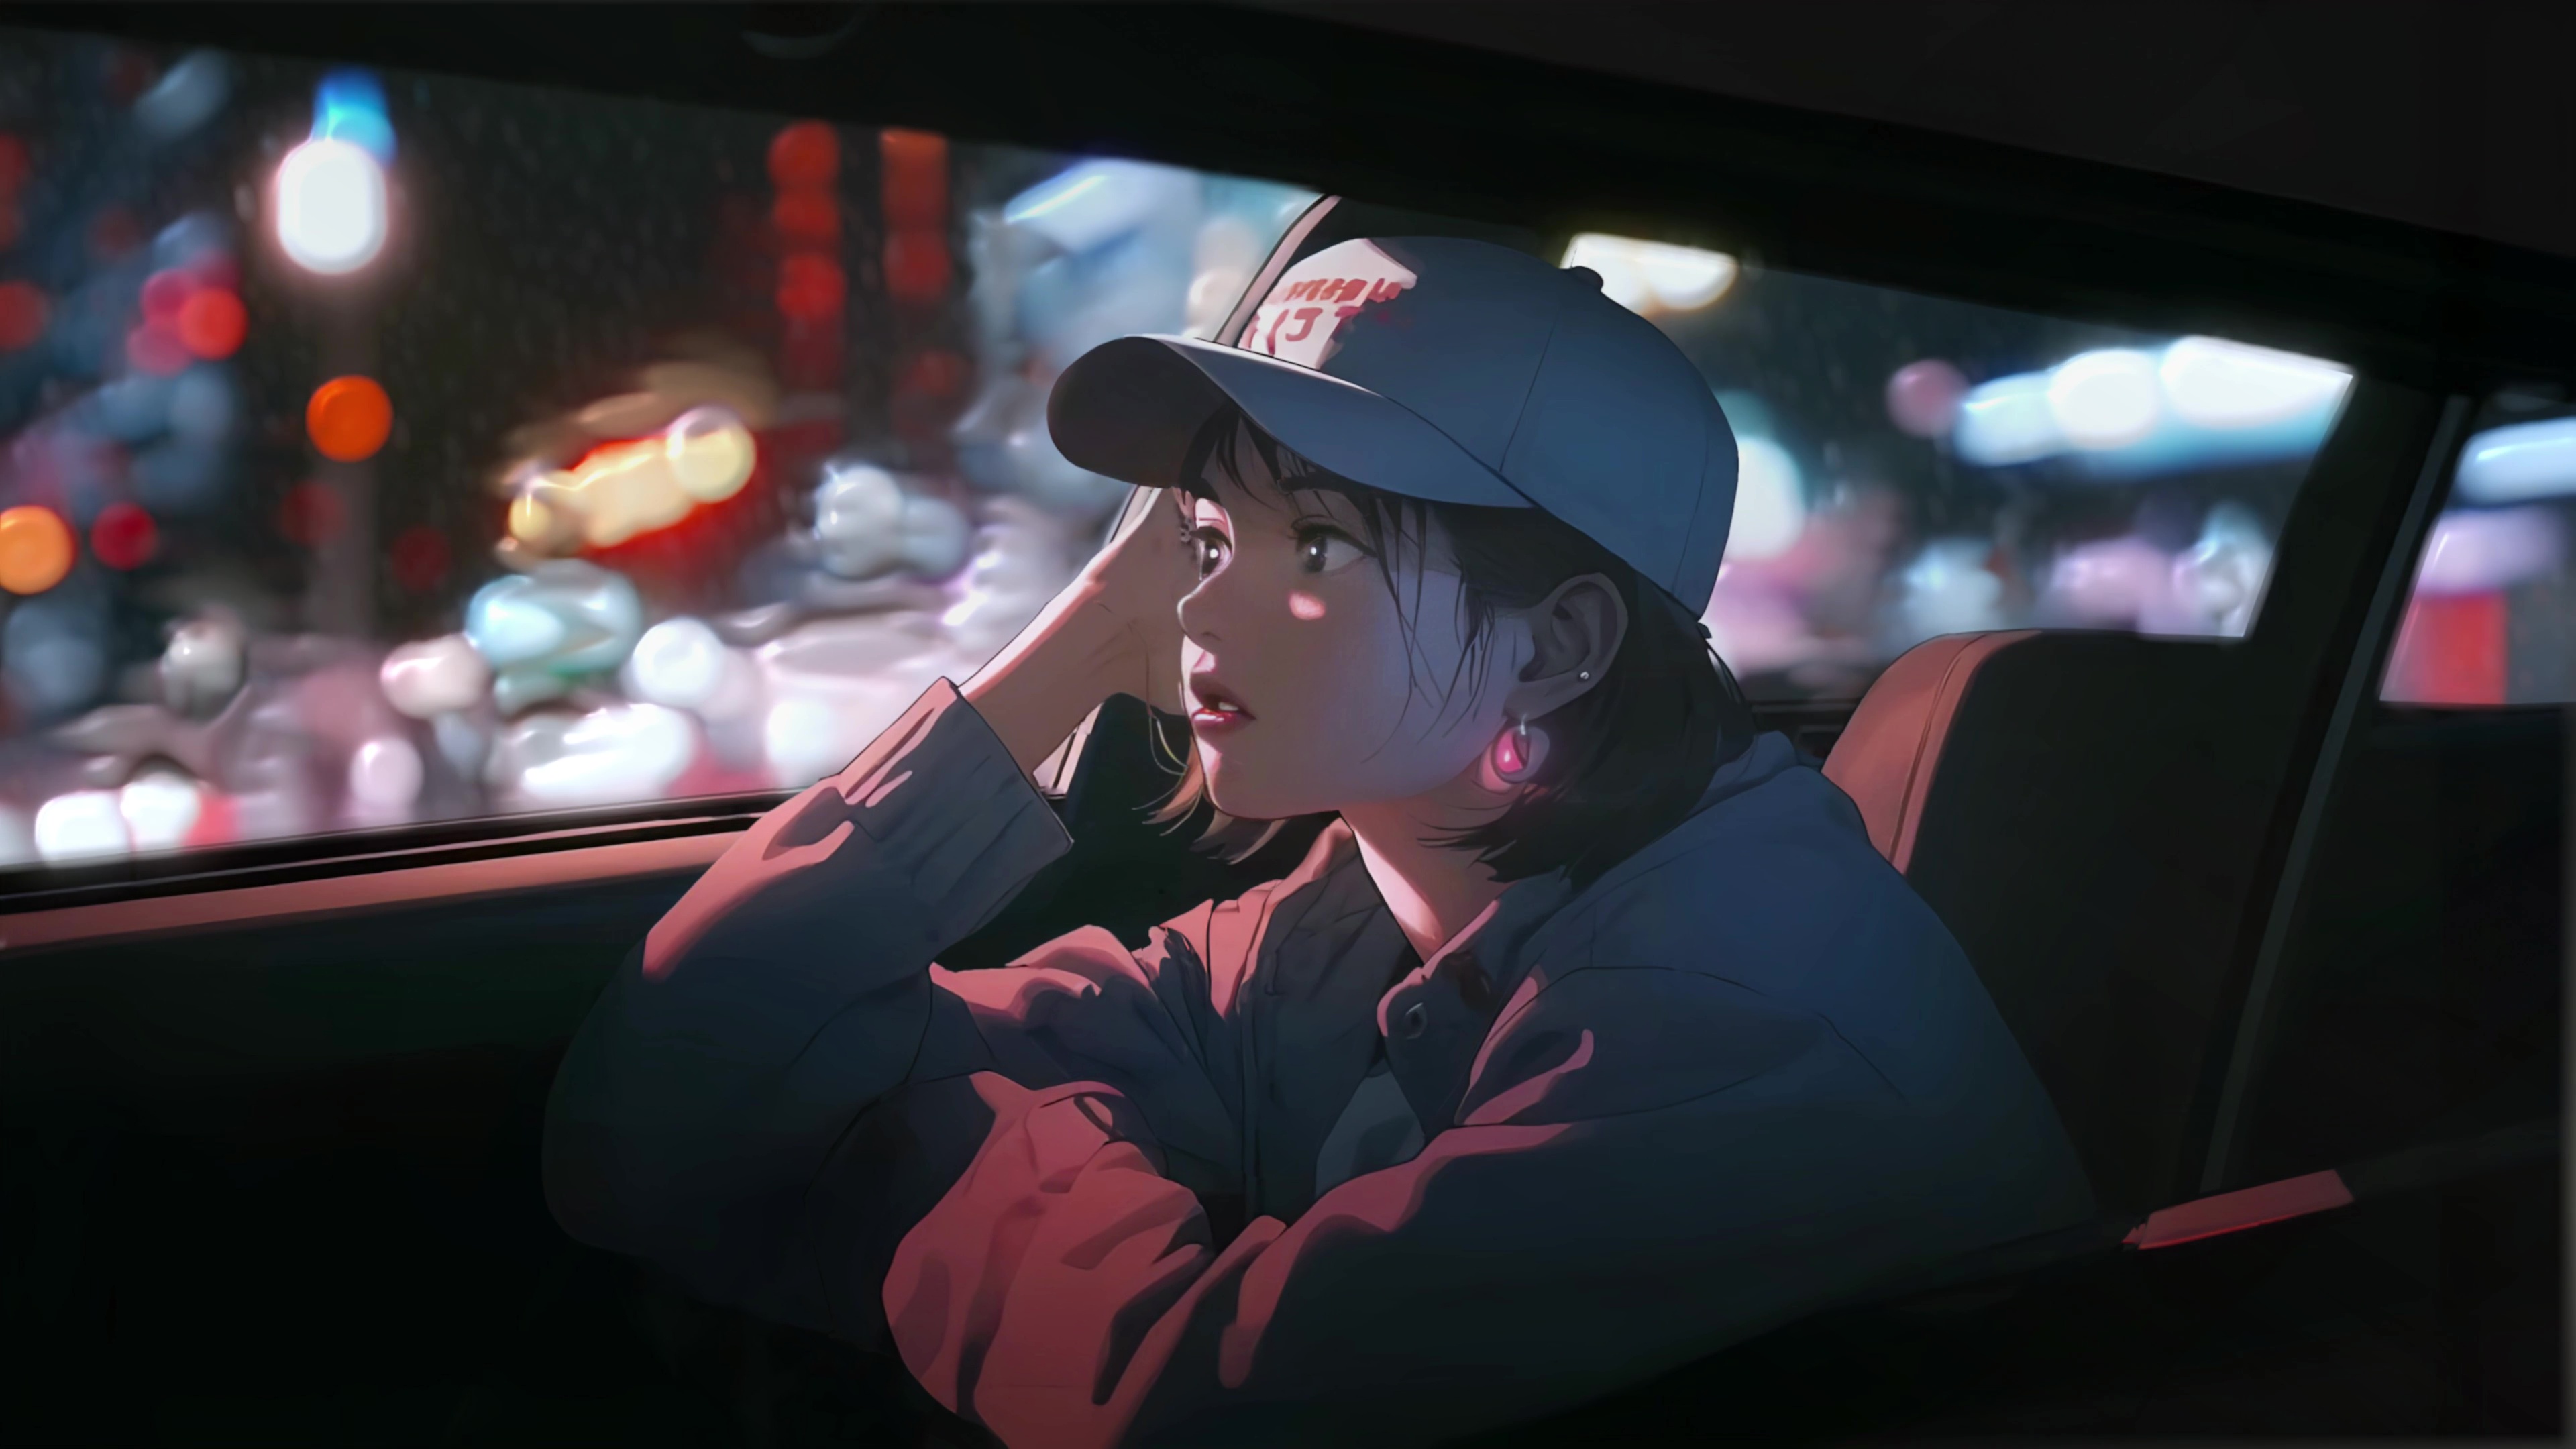 Short Hair Anime Girl In Rainy Night Live Wallpaper - HDLiveWall.com.